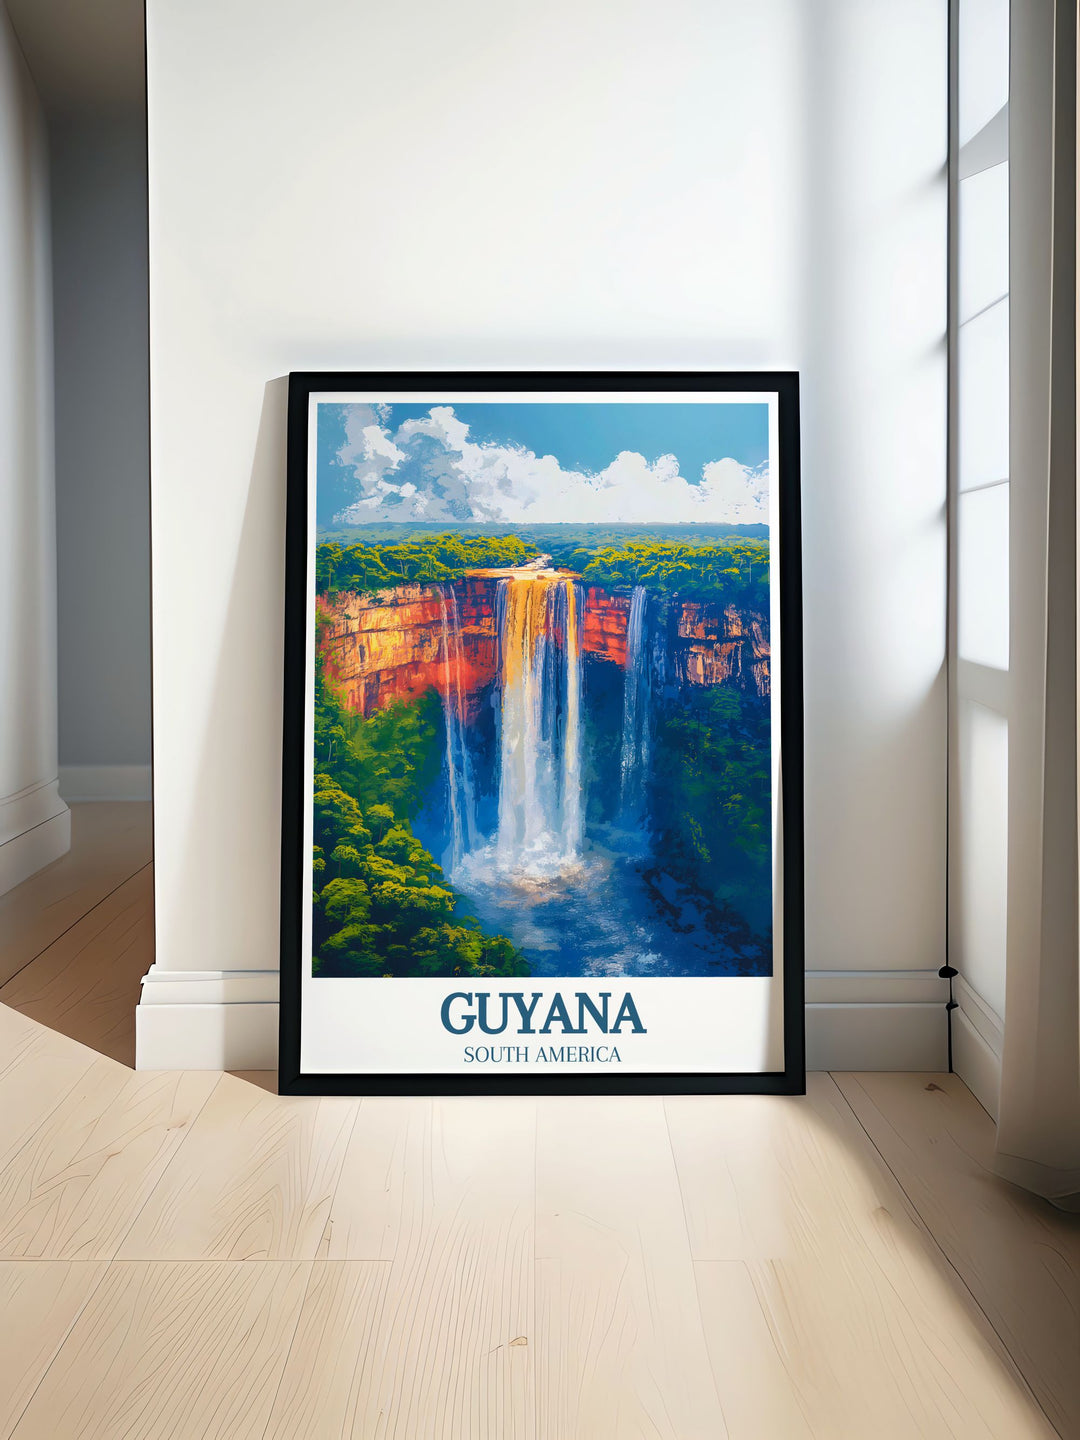 This travel poster of Kaieteur Falls in Guyana captures the majestic beauty of the worlds largest single drop waterfall, perfect for adding a touch of natural wonder to your home decor.